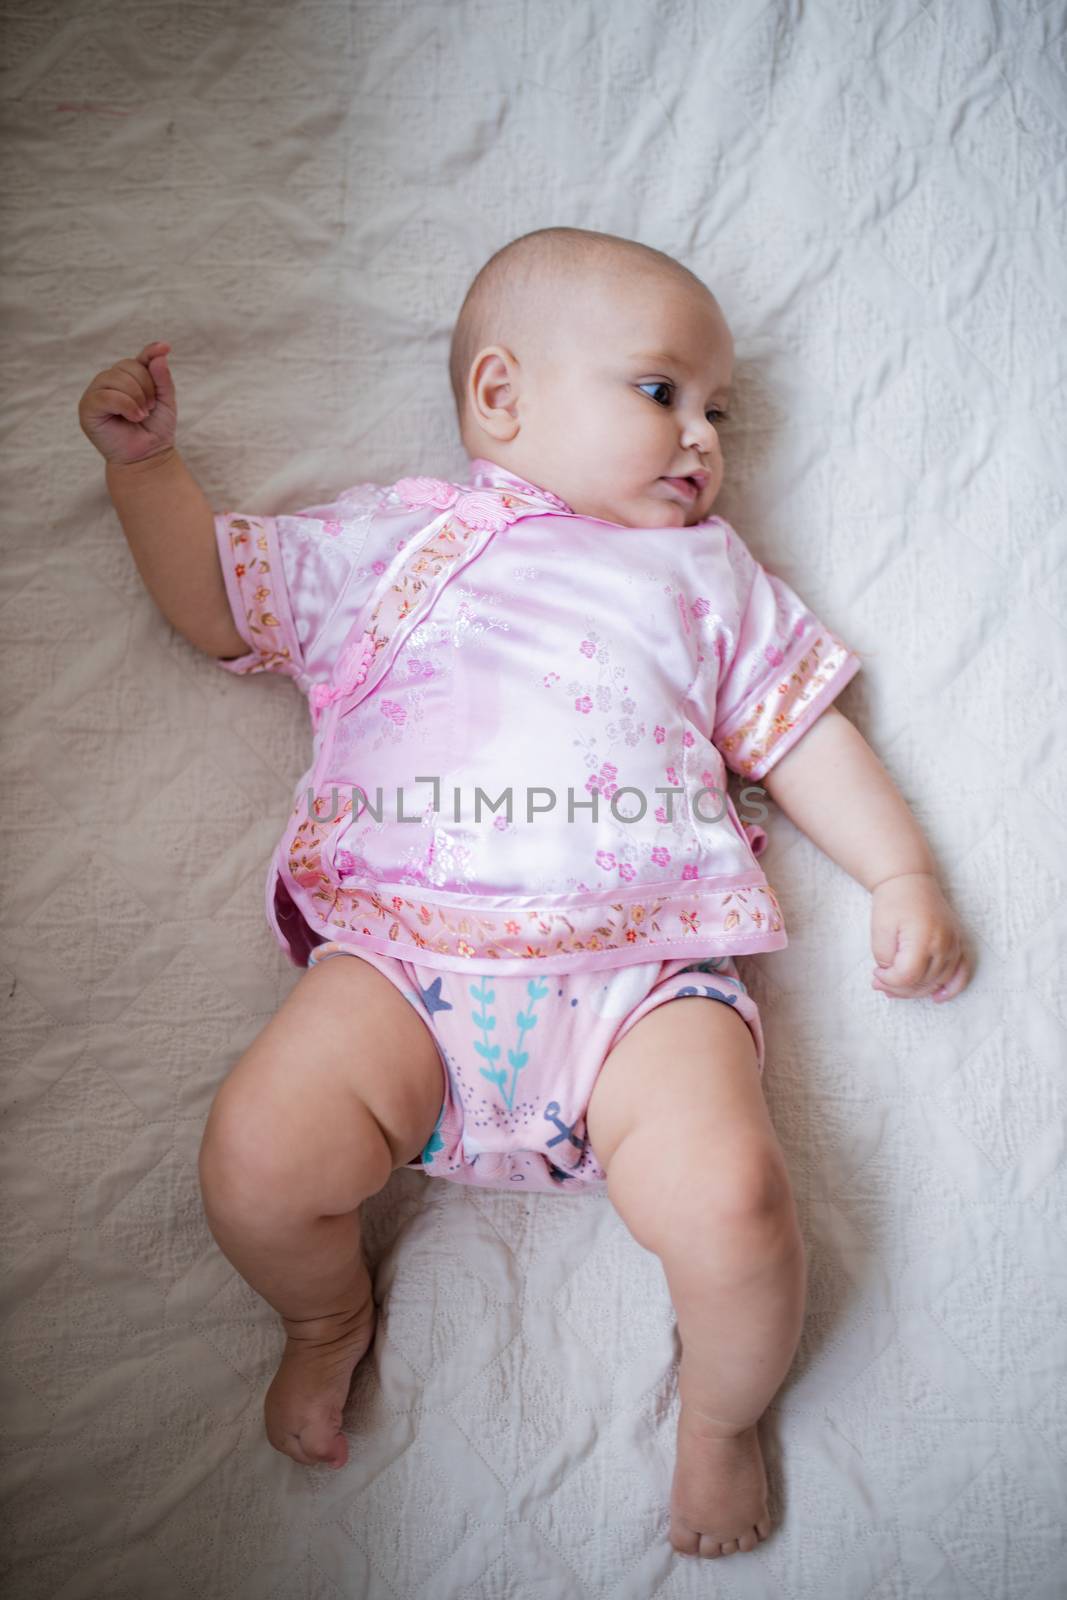 Distracted adorable baby girl from above in Asian pink attire lying down on white bed. Portrait of cute female baby resting on bed. Happy babies on cradles and beds